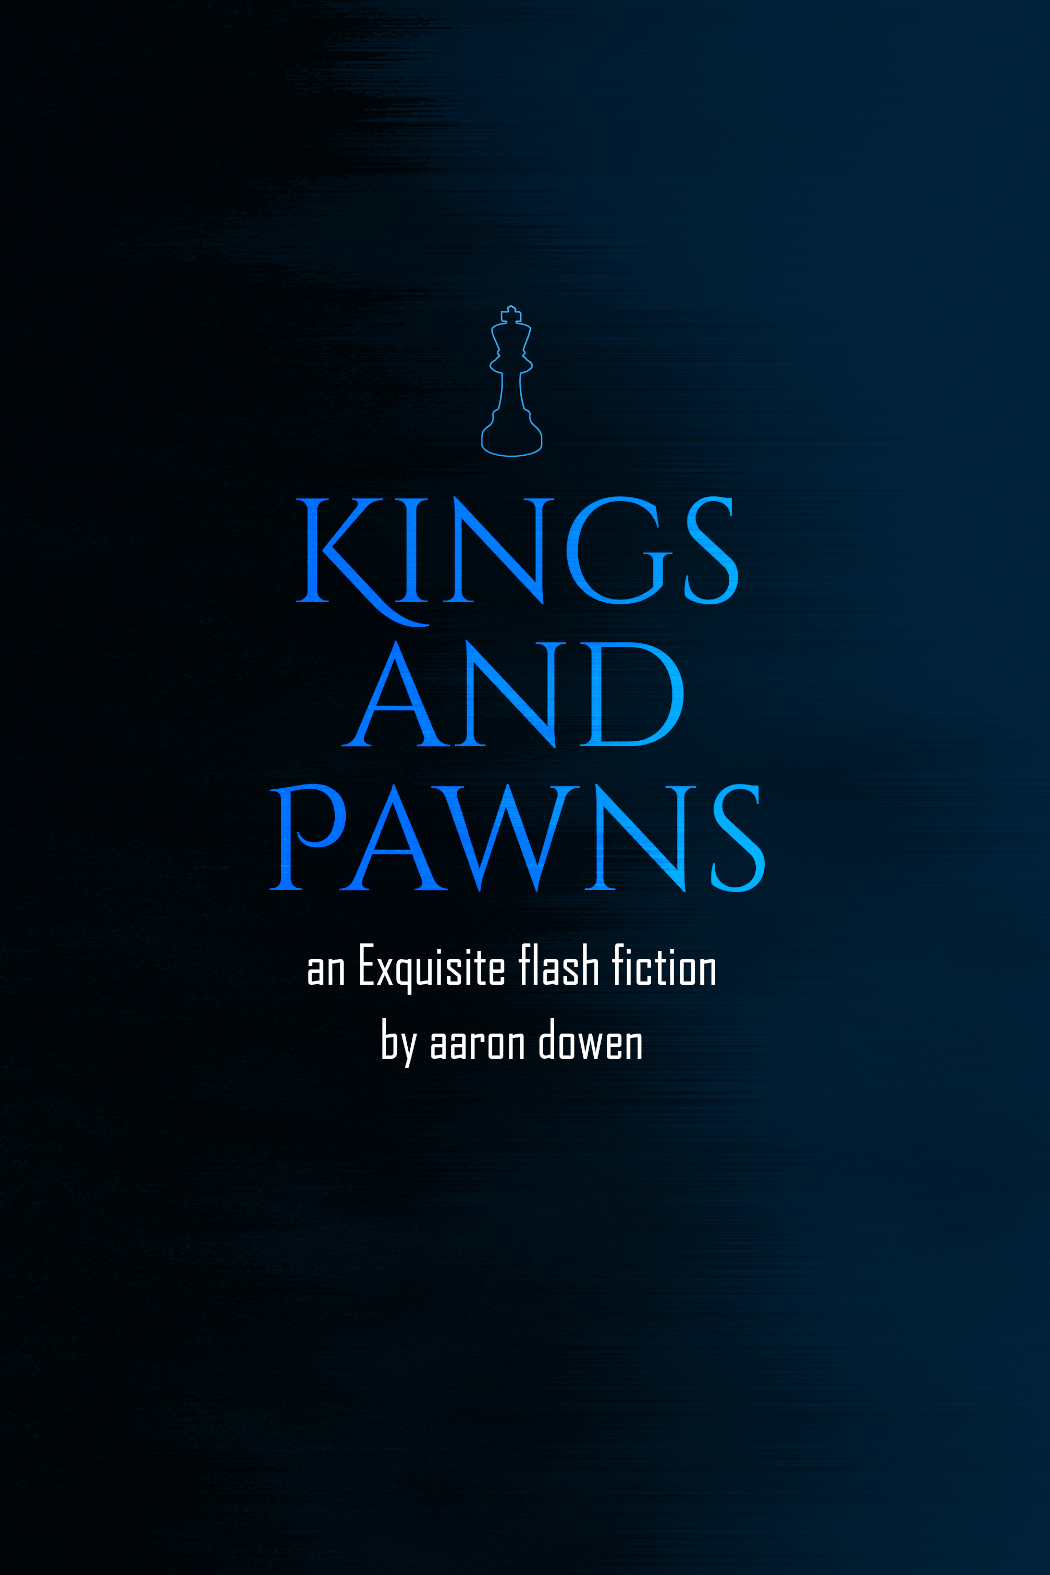 Kings and Pawns flash fiction cover